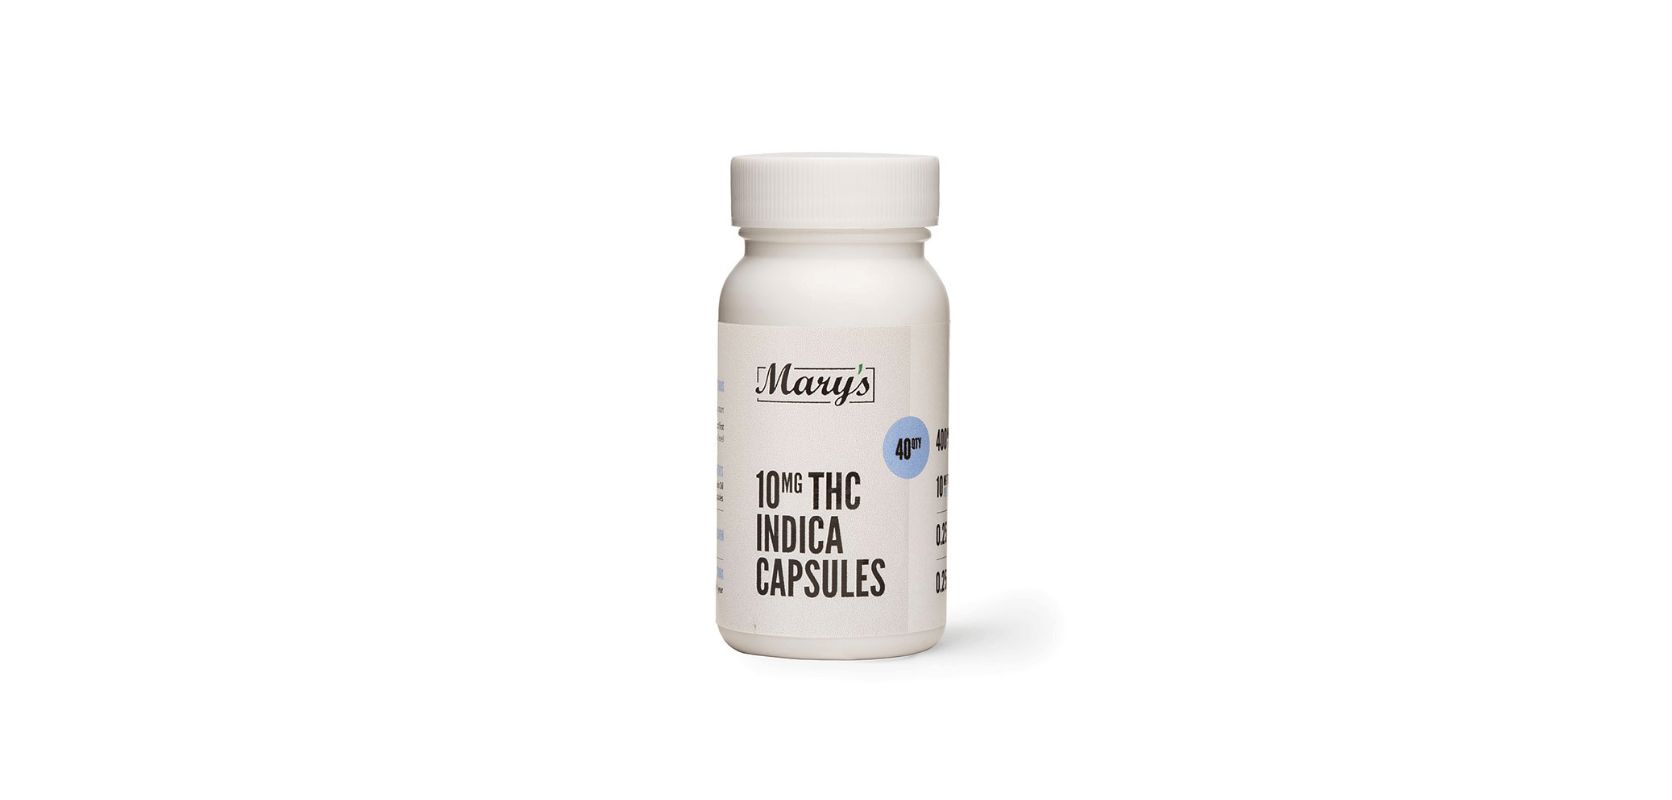 The Mary’s Medibles – THC Capsules 10mg Indica is the best option if you want to feel relaxed, stress-free, and sedated.